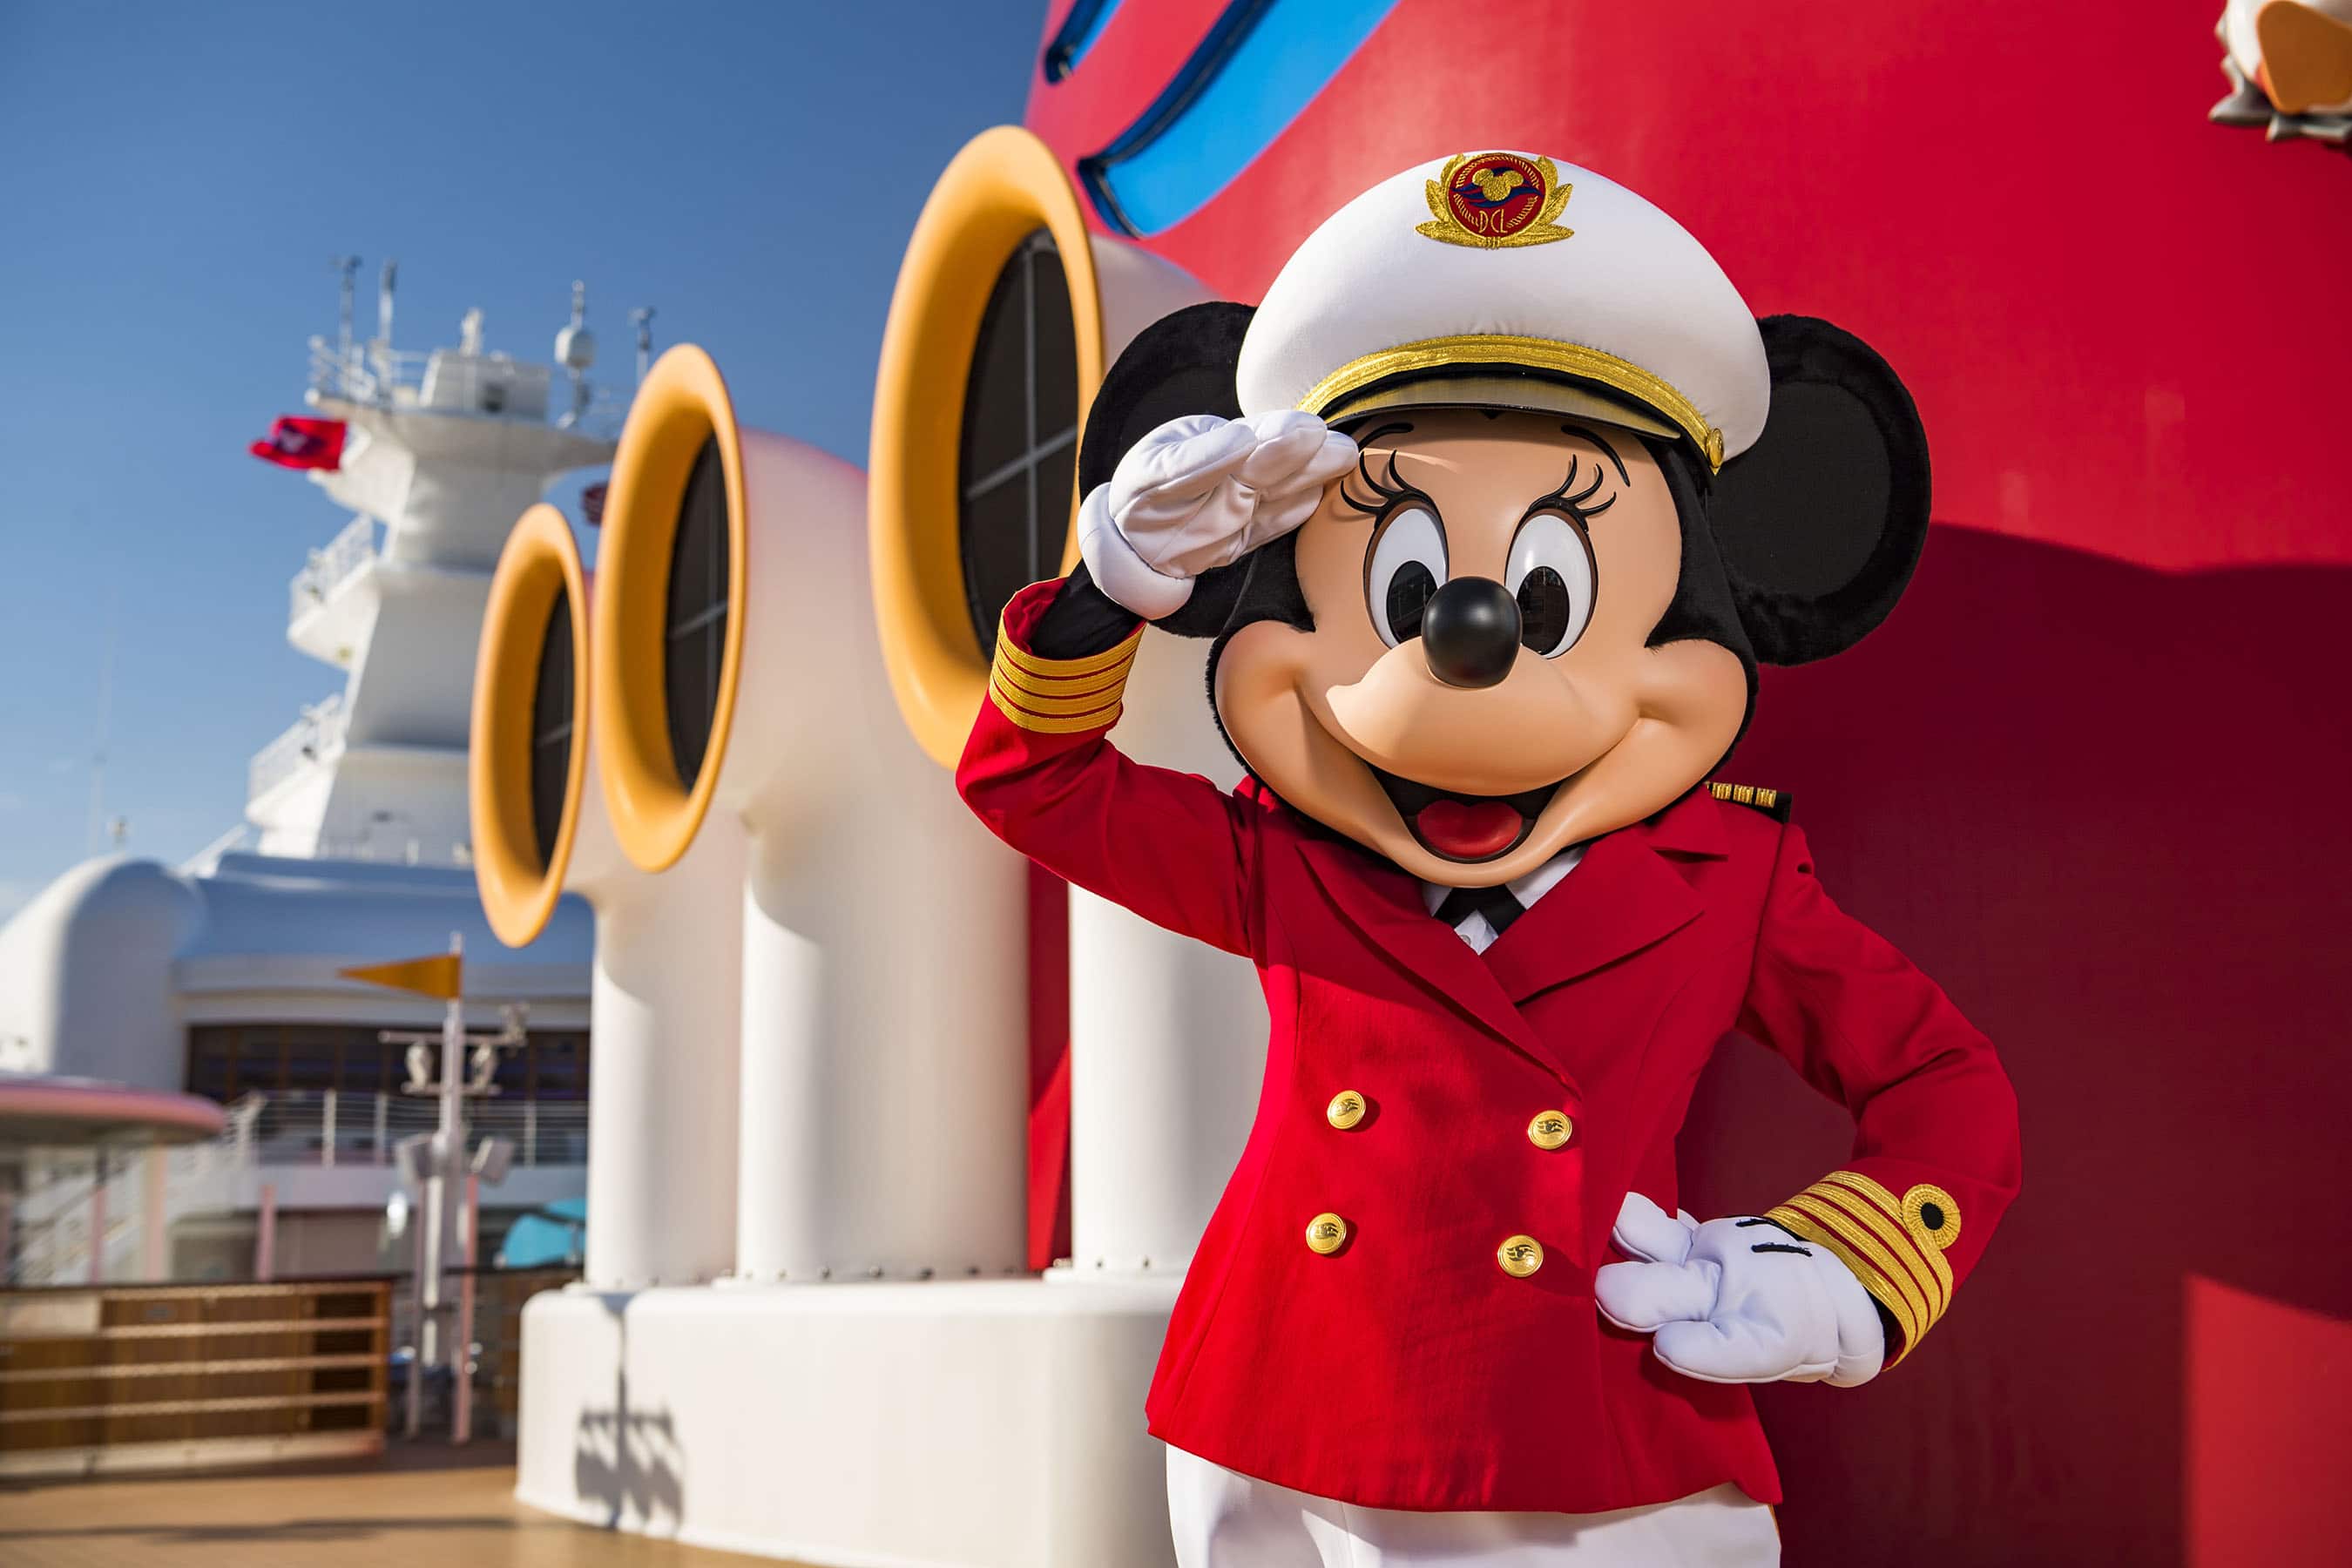 Disney Cruise Line introduces Captain Minnie Mouse - Travel to the Magic